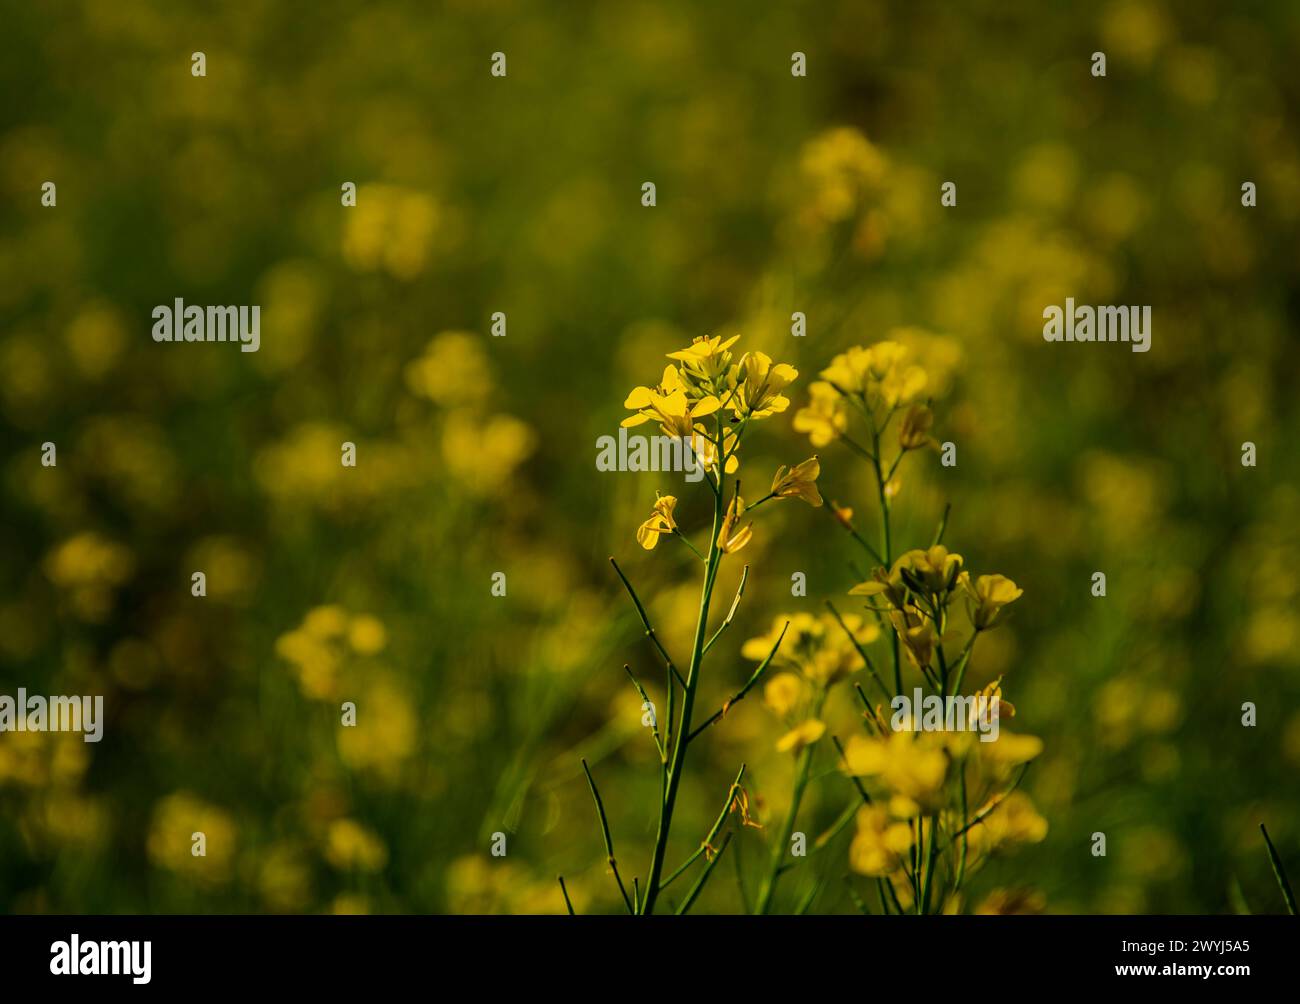 Mustard flower.Flowers are reproductive structures of plants that are responsible for producing seeds. They are typically brightly colored and fragran Stock Photo